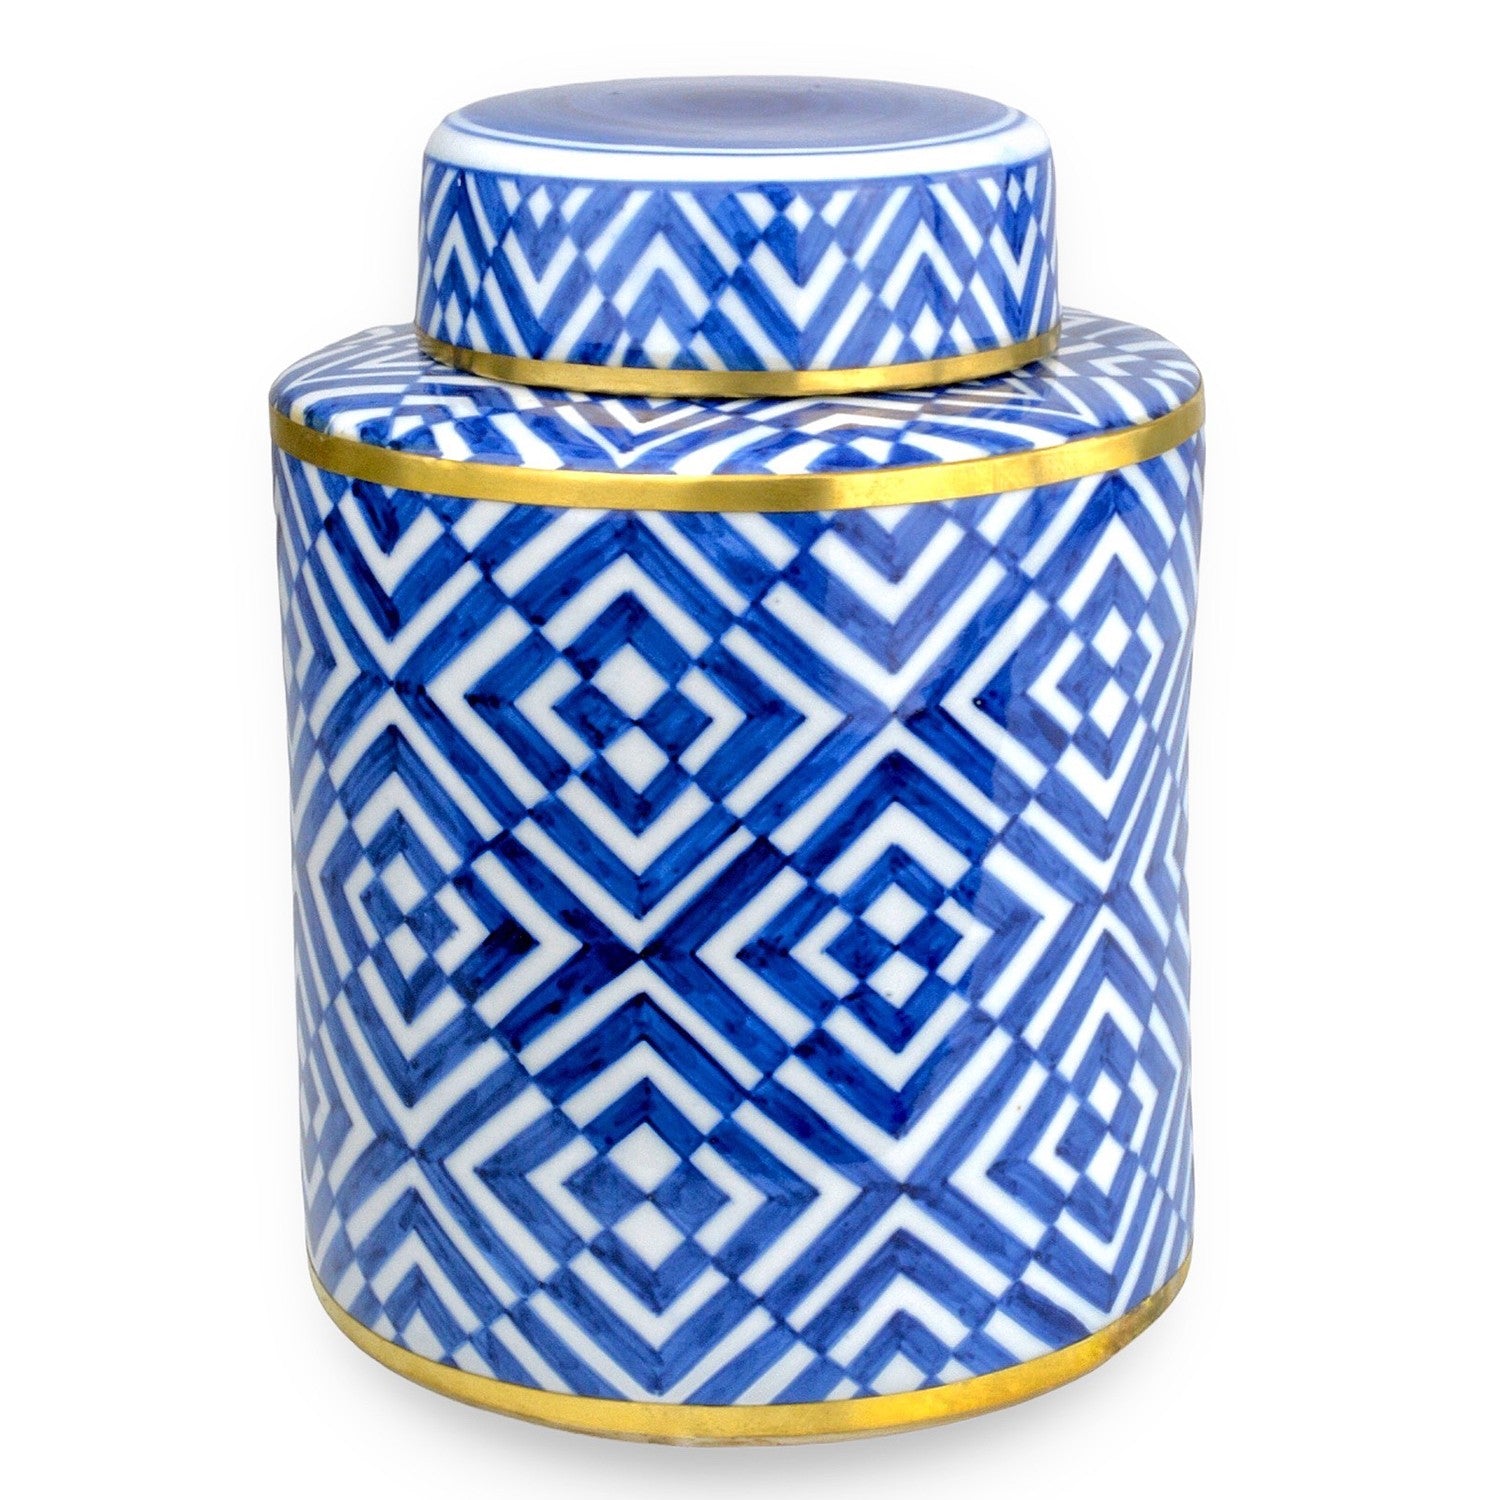 Currey and Company - 1200-0752 - Jar - Blue/White